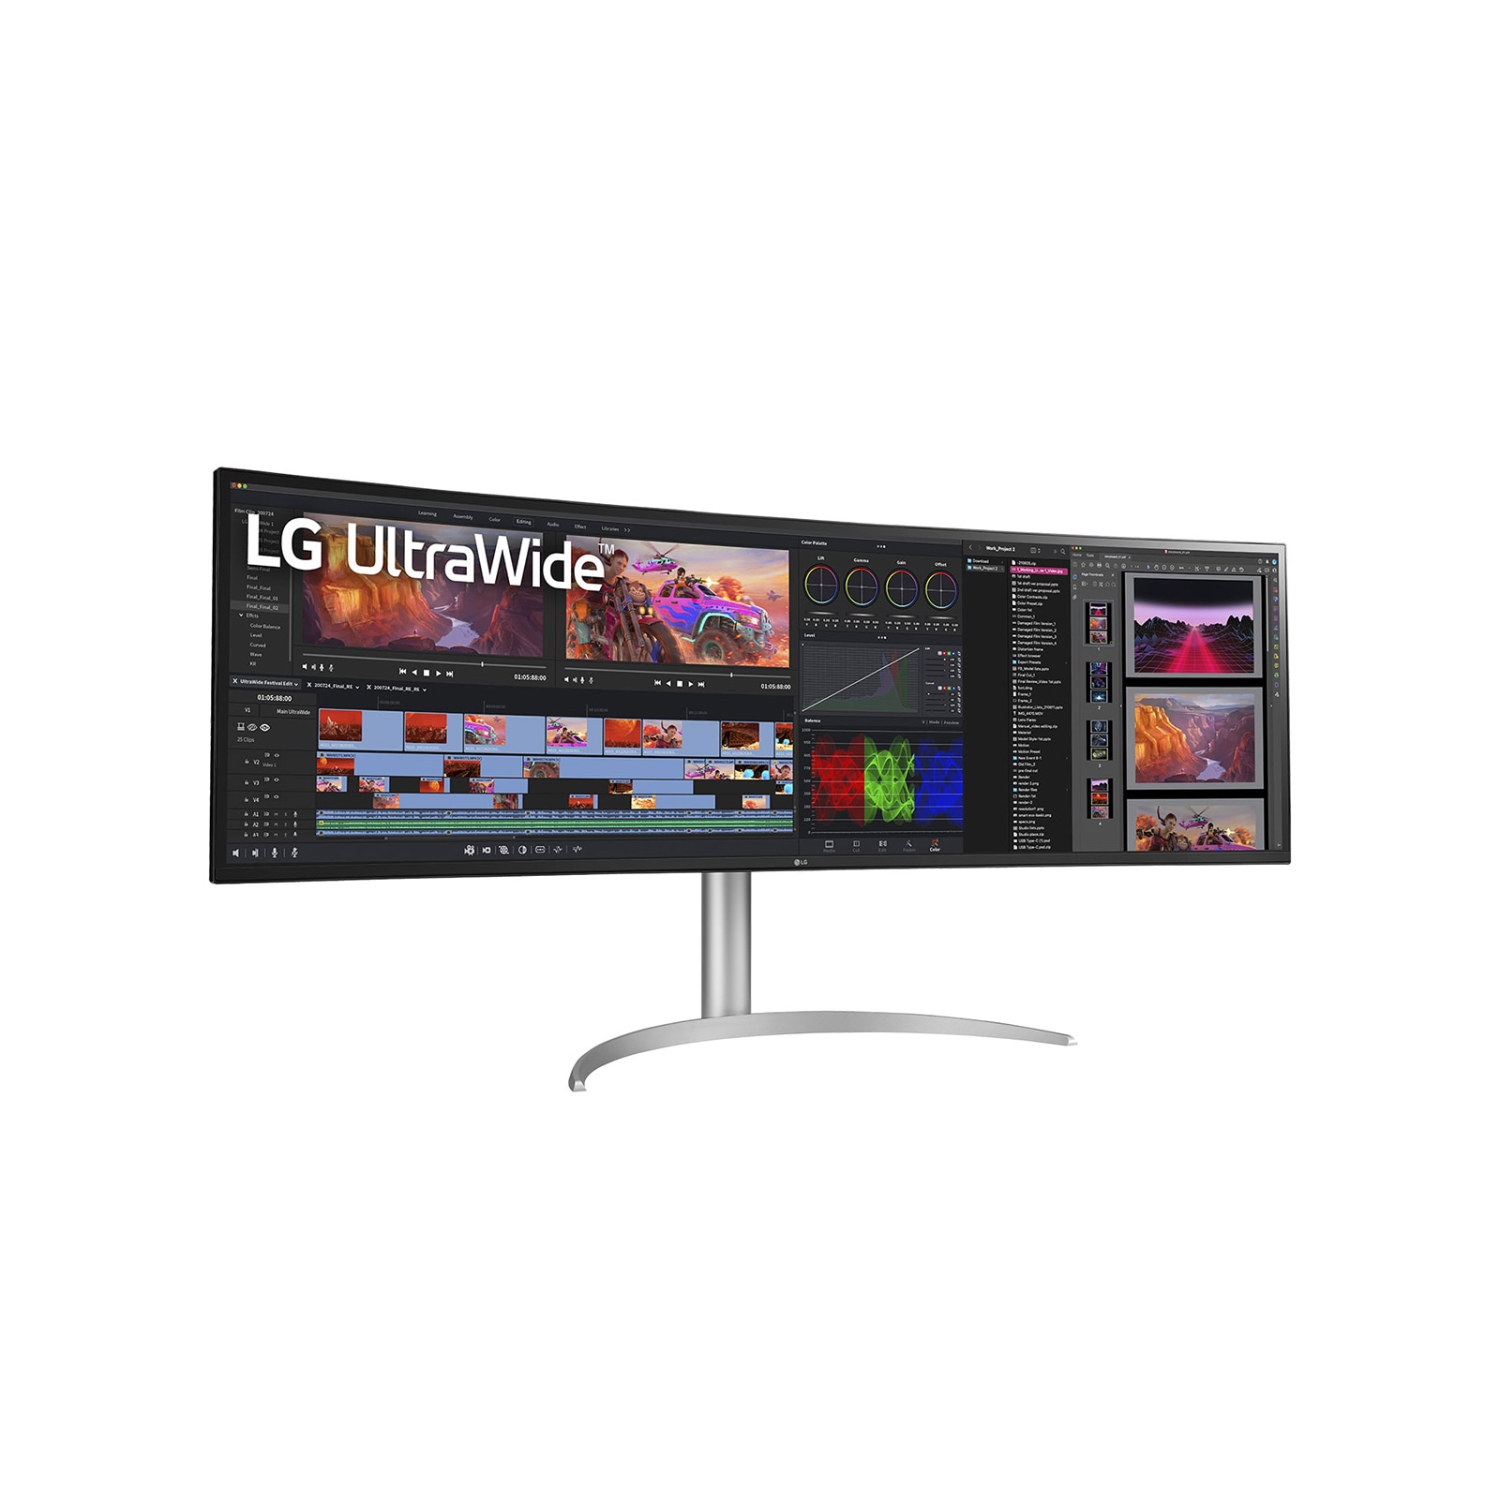 LG UltraWide 49” 32:9 Dual QHD (5120 x 1440) Nano IPS Curved, DCI-P3 98% dHDR 400, USB-C, Height/Tilt/Swivel Adjustable, Built-in Speakers (49WQ95C-W)